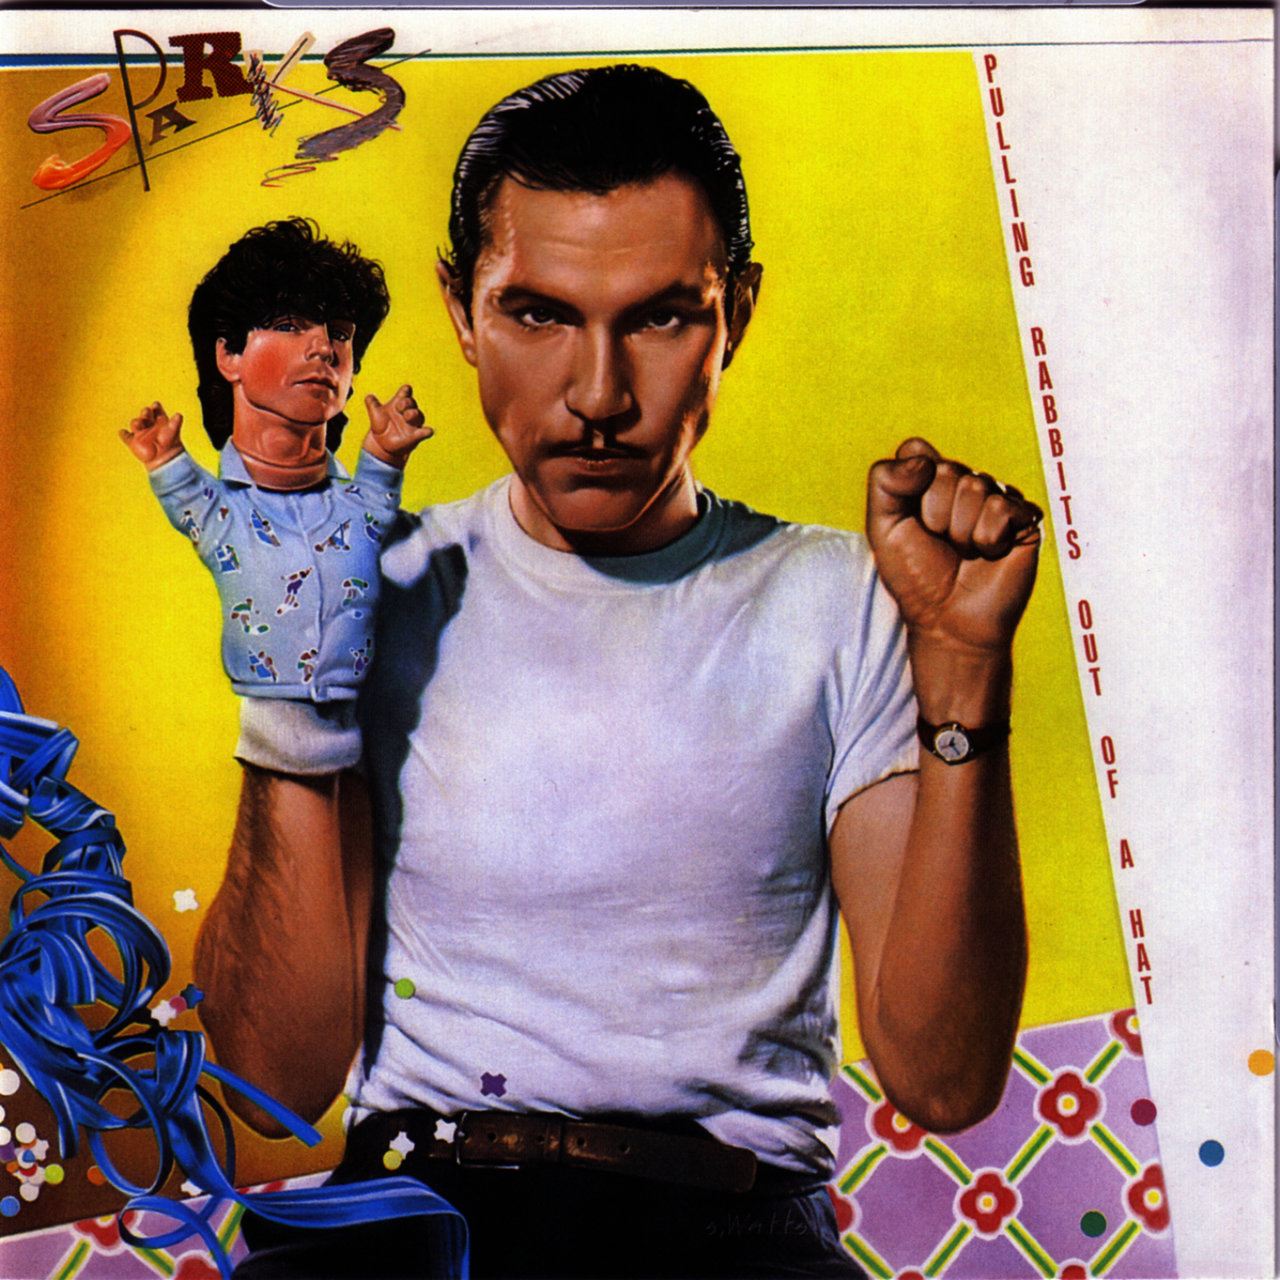 Album artwork for 'Pulling Rabbits Out of A Hat' by Sparks